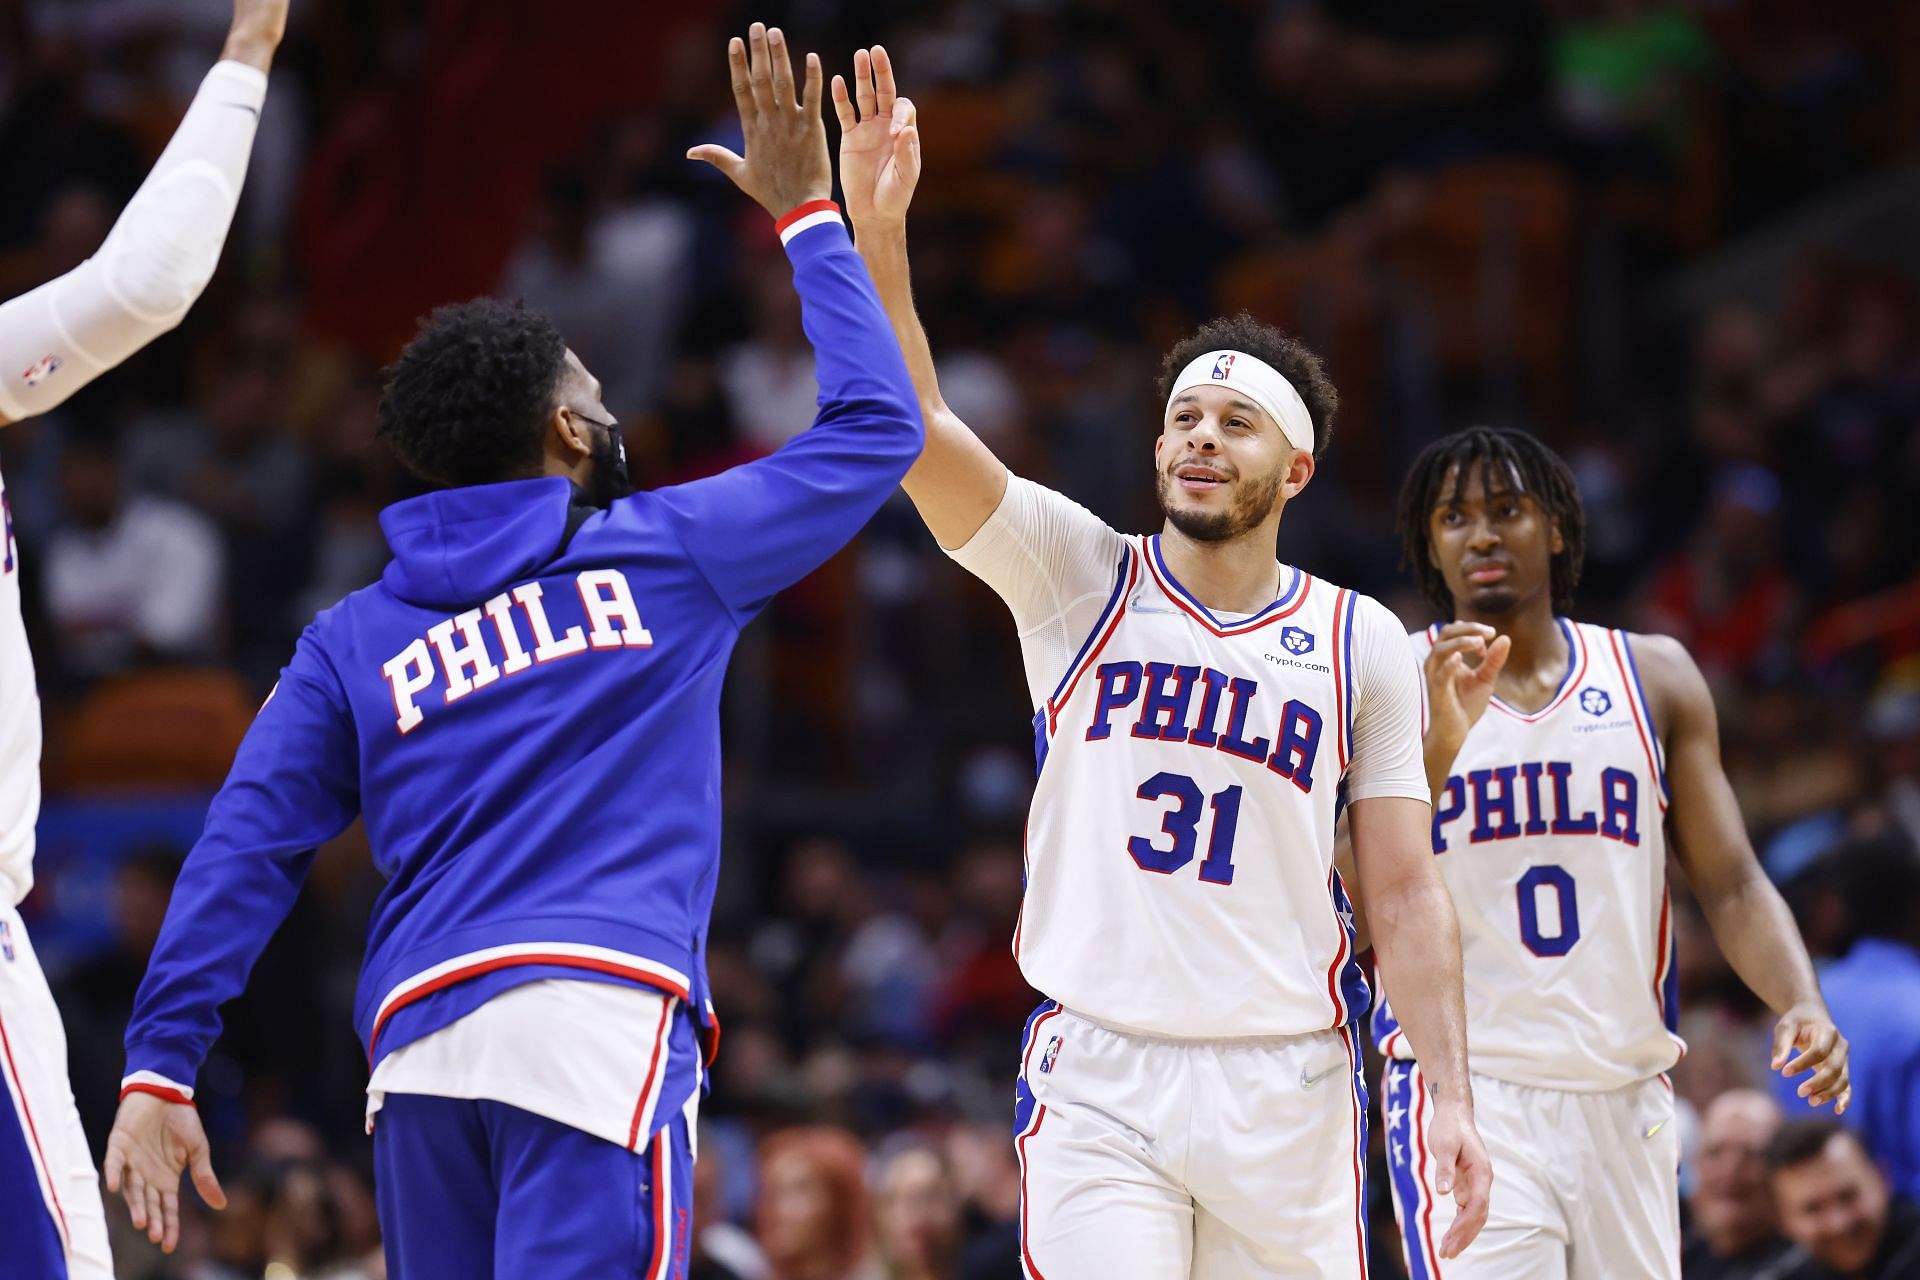 Philadelphia 76ers will be without their sharhsooter Seth Curry for this game